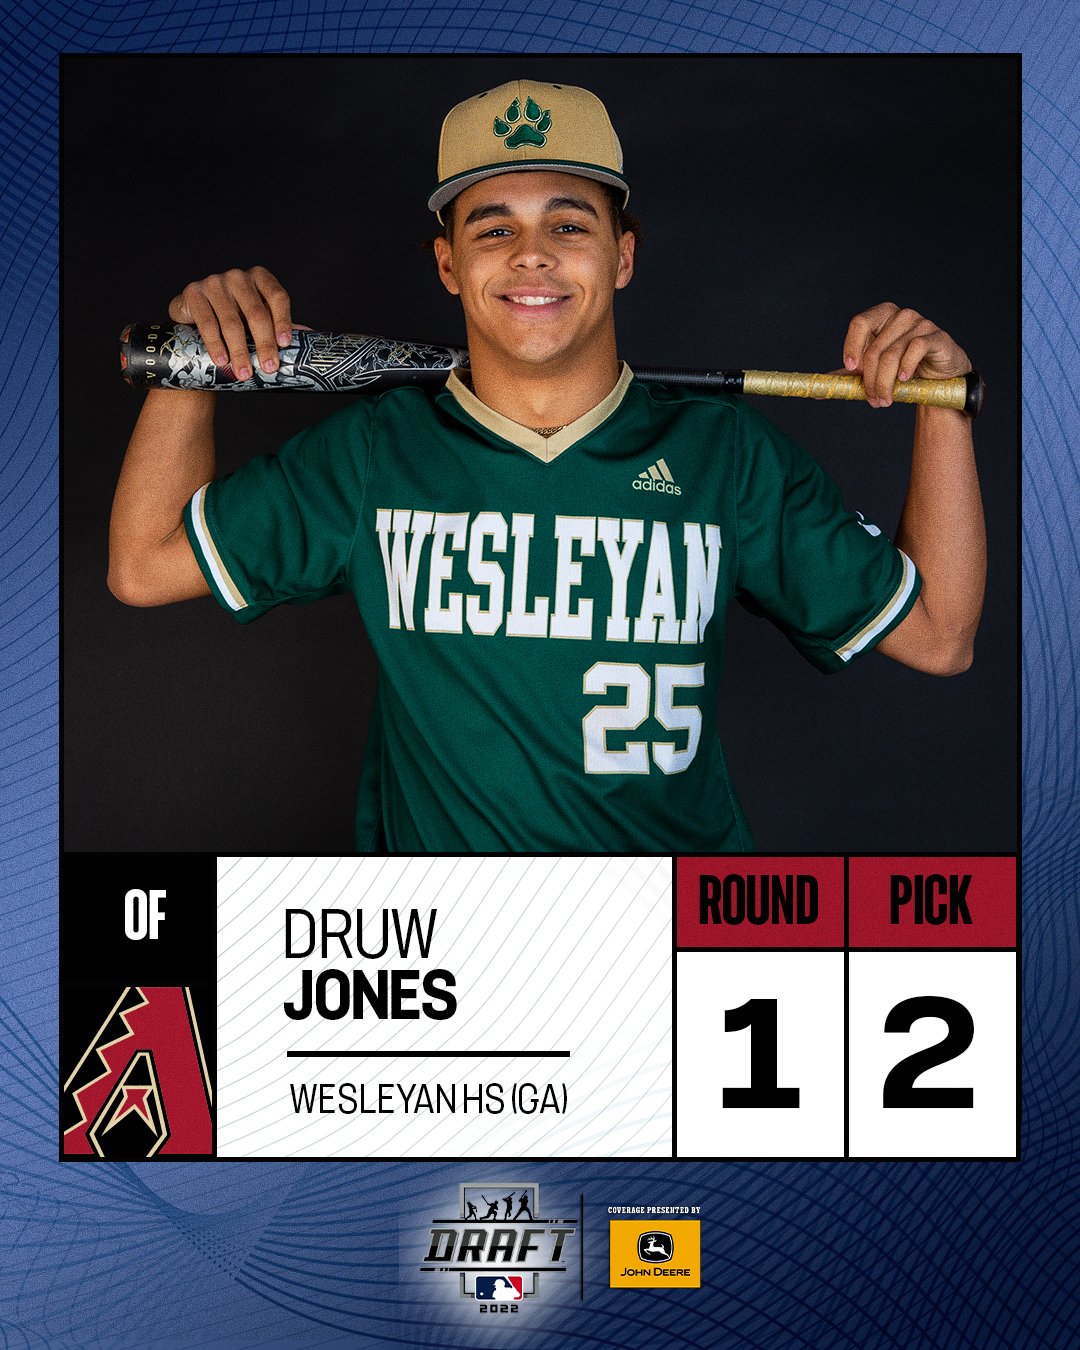 MLB on X: With the 2nd overall pick in the 2022 #MLBDraft, the @Dbacks  select OF Druw Jones, the son of Braves legend Andruw.   / X